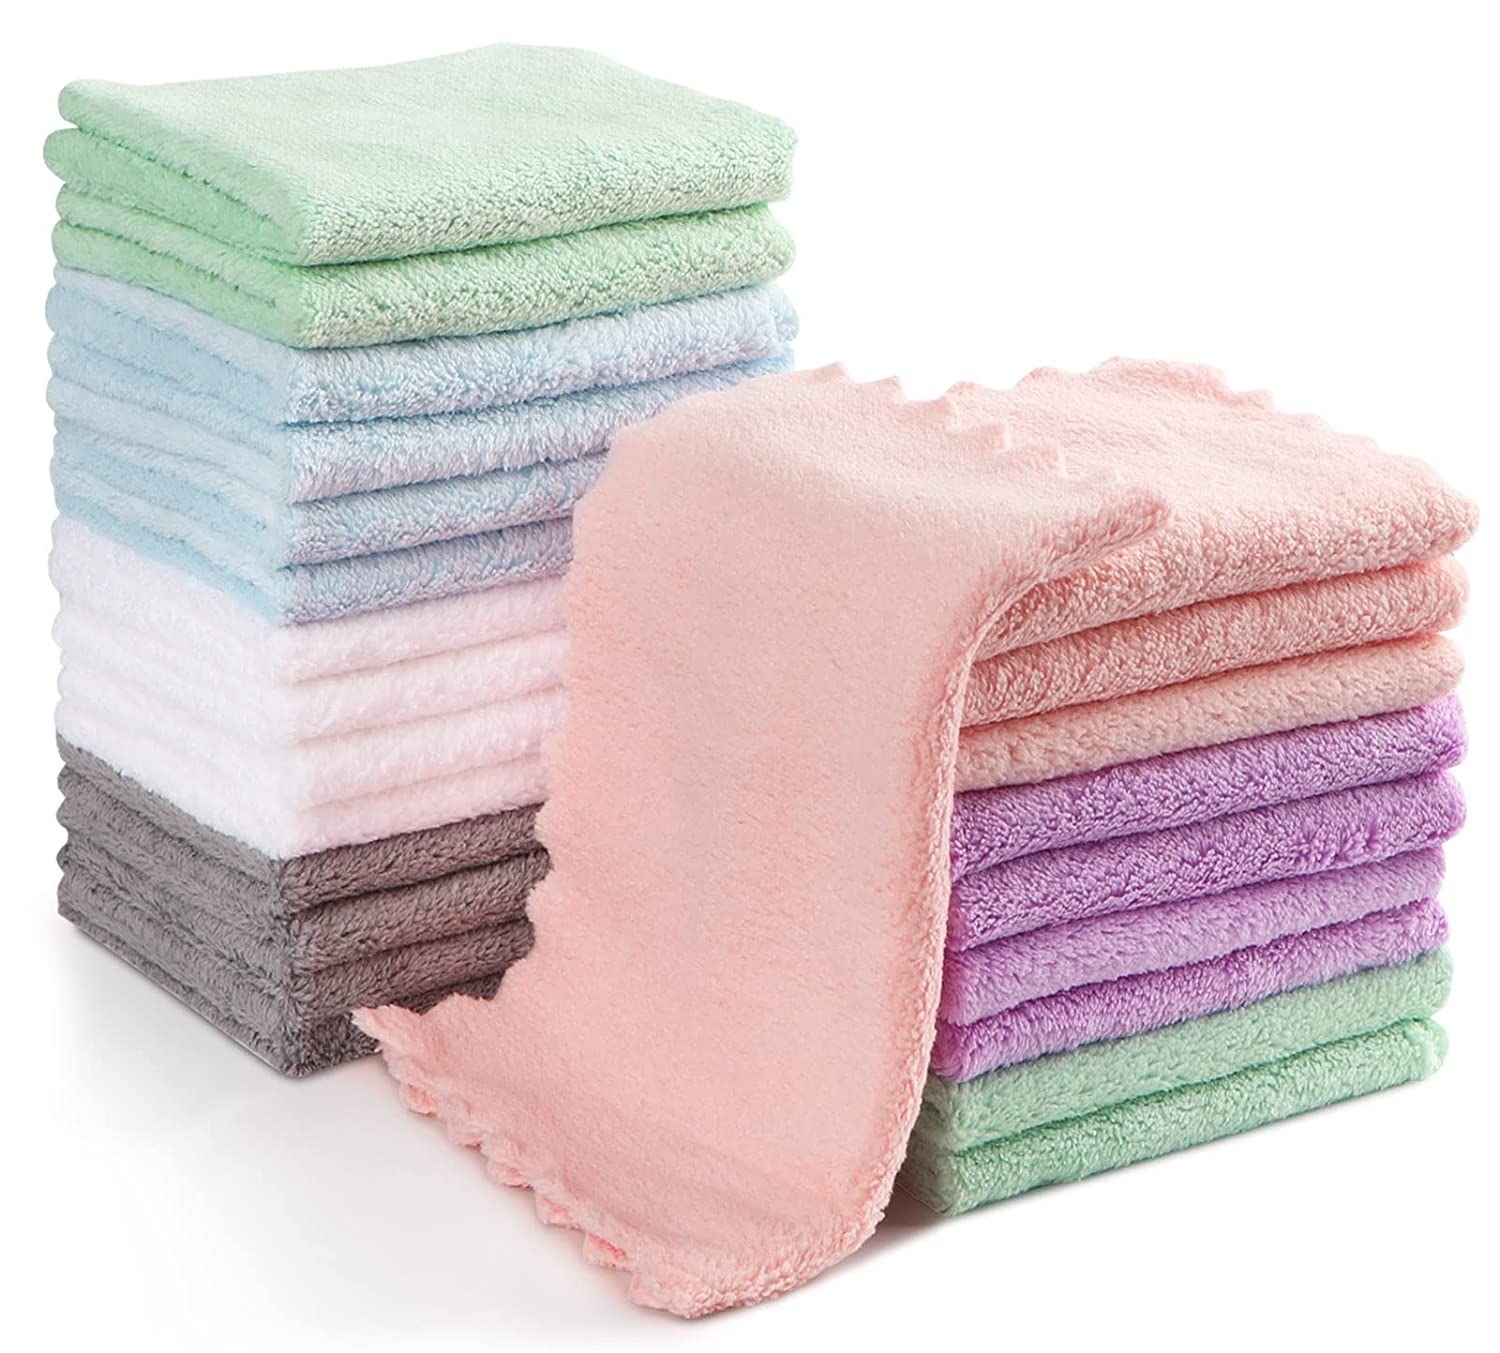 the colorful baby washcloths